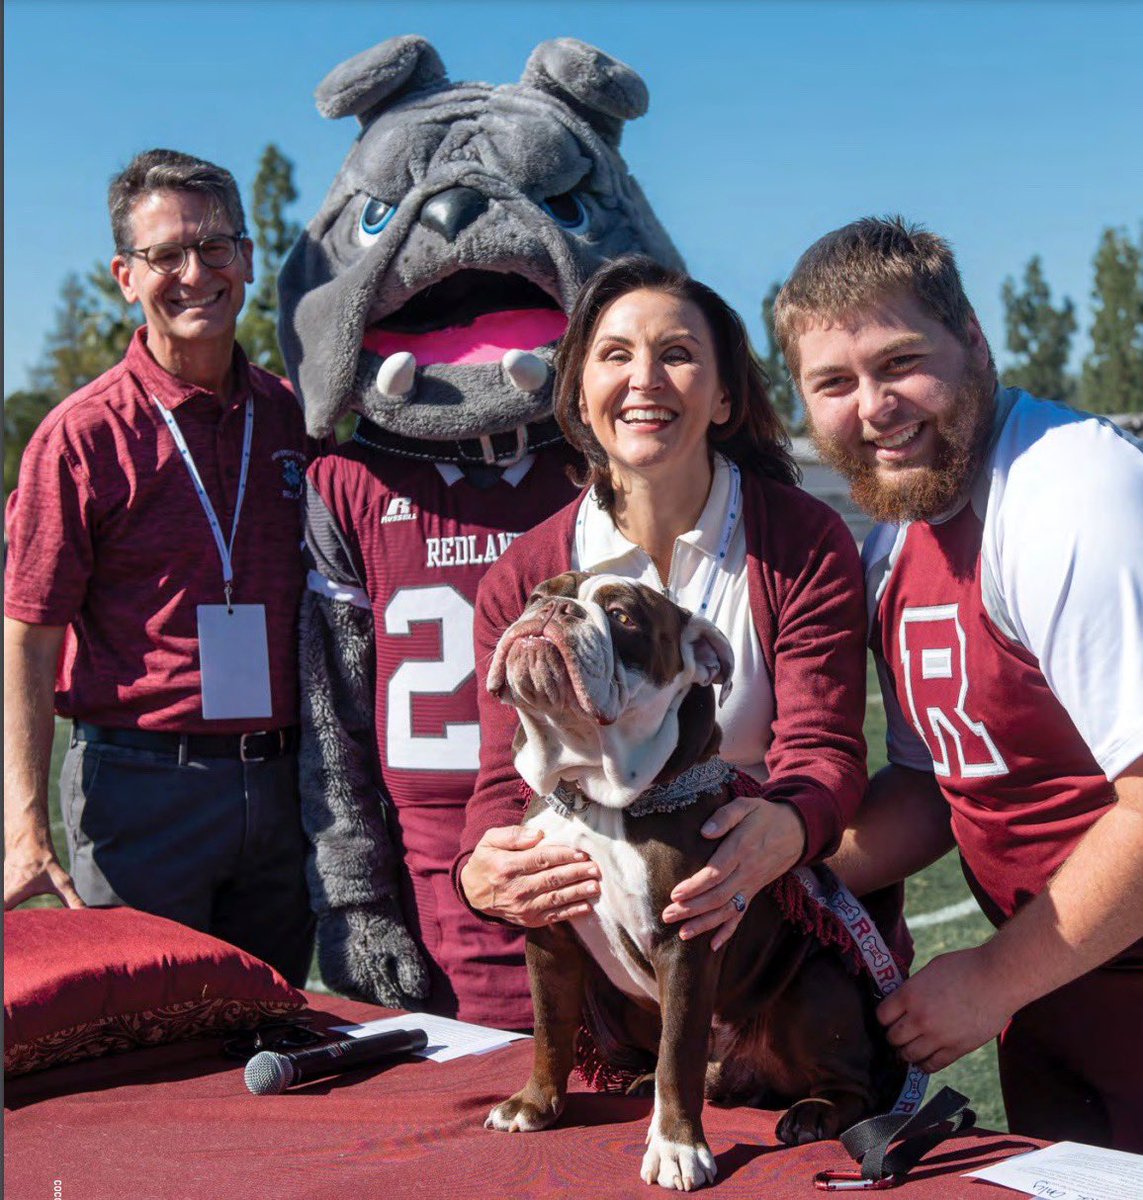 George Willis has completed his first official academic year as our Bulldog mascot! On this #NationalMascotDay, we are proud to celebrate George as a symbol of our Bulldog spirit.   

#NationalMascotDay #UniversityofRedlands